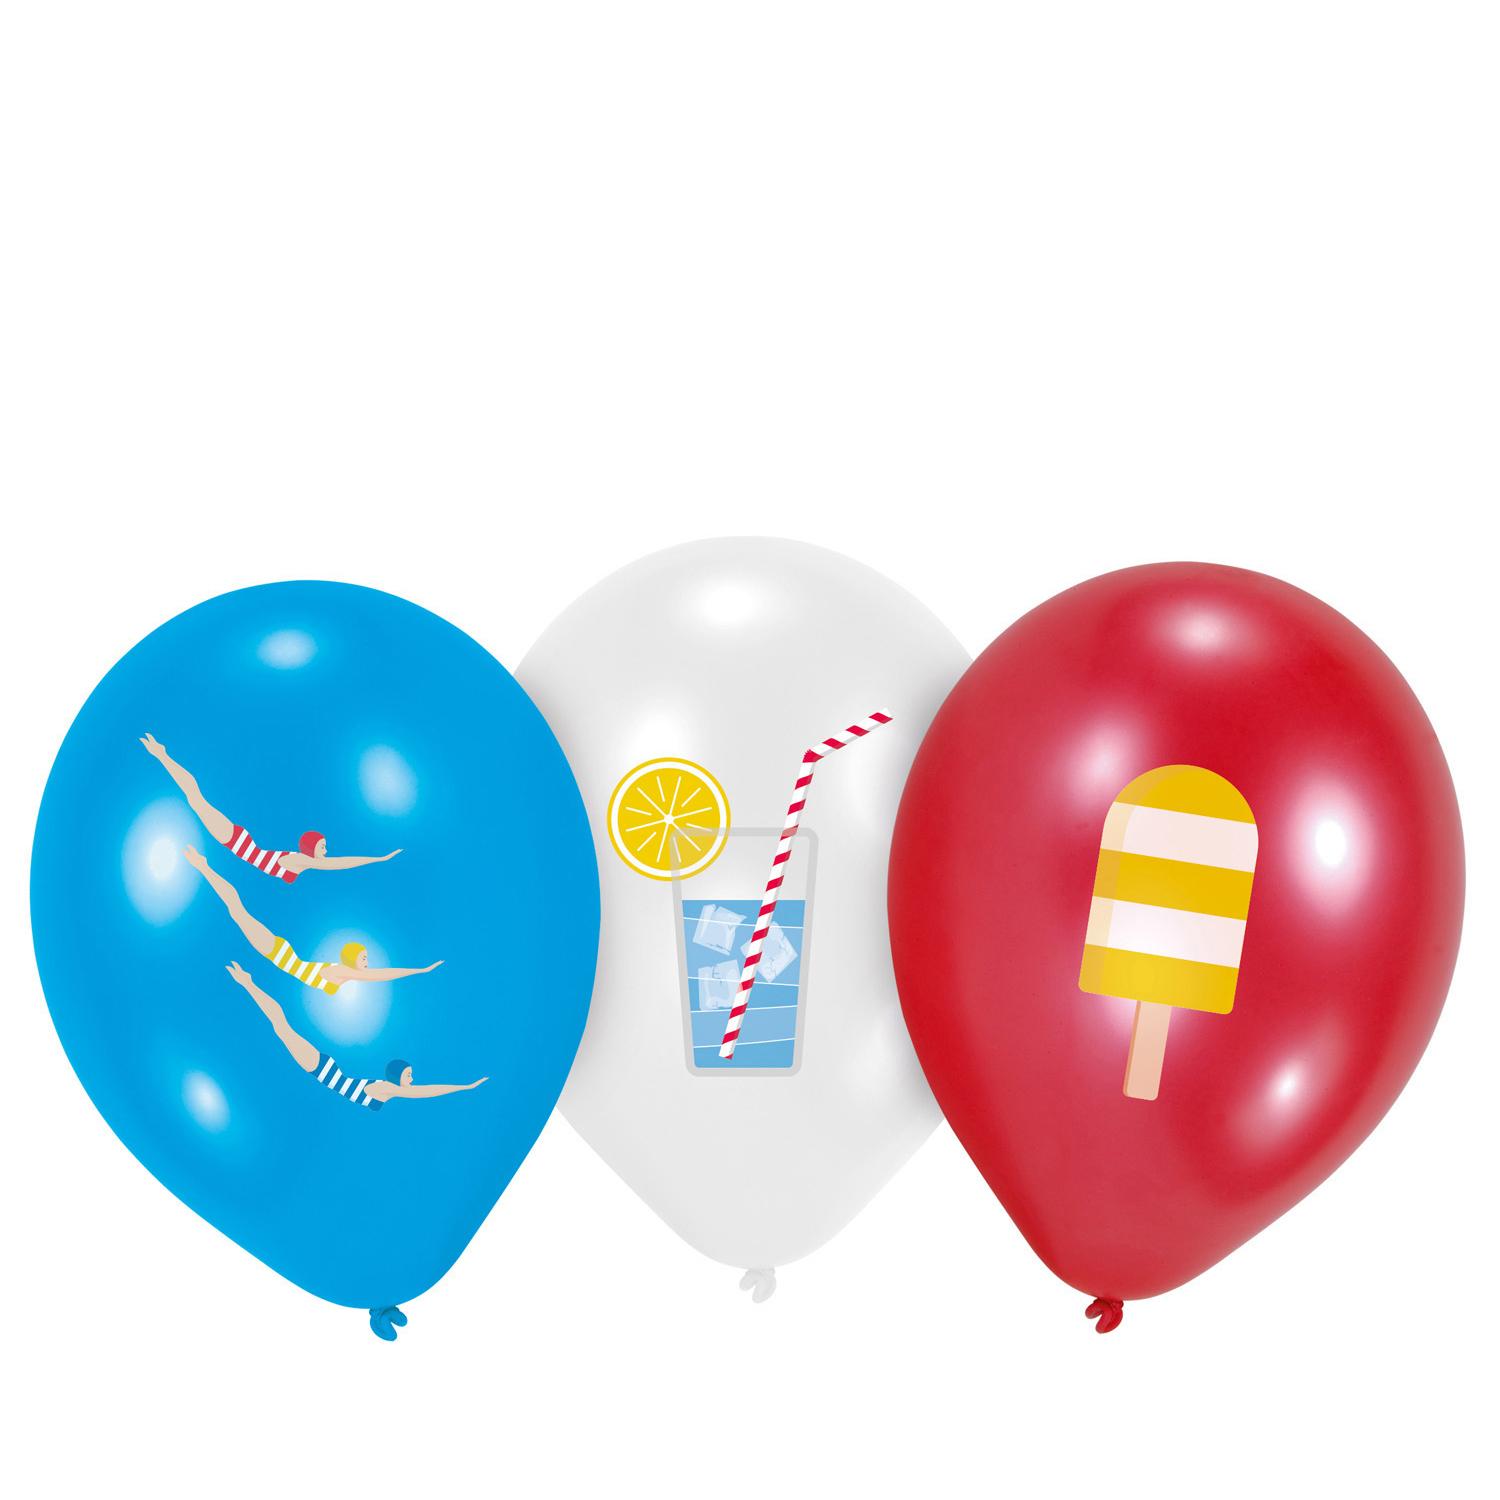 Summer Stories 4c Latex Balloons 11in, 6pcs Balloons & Streamers - Party Centre